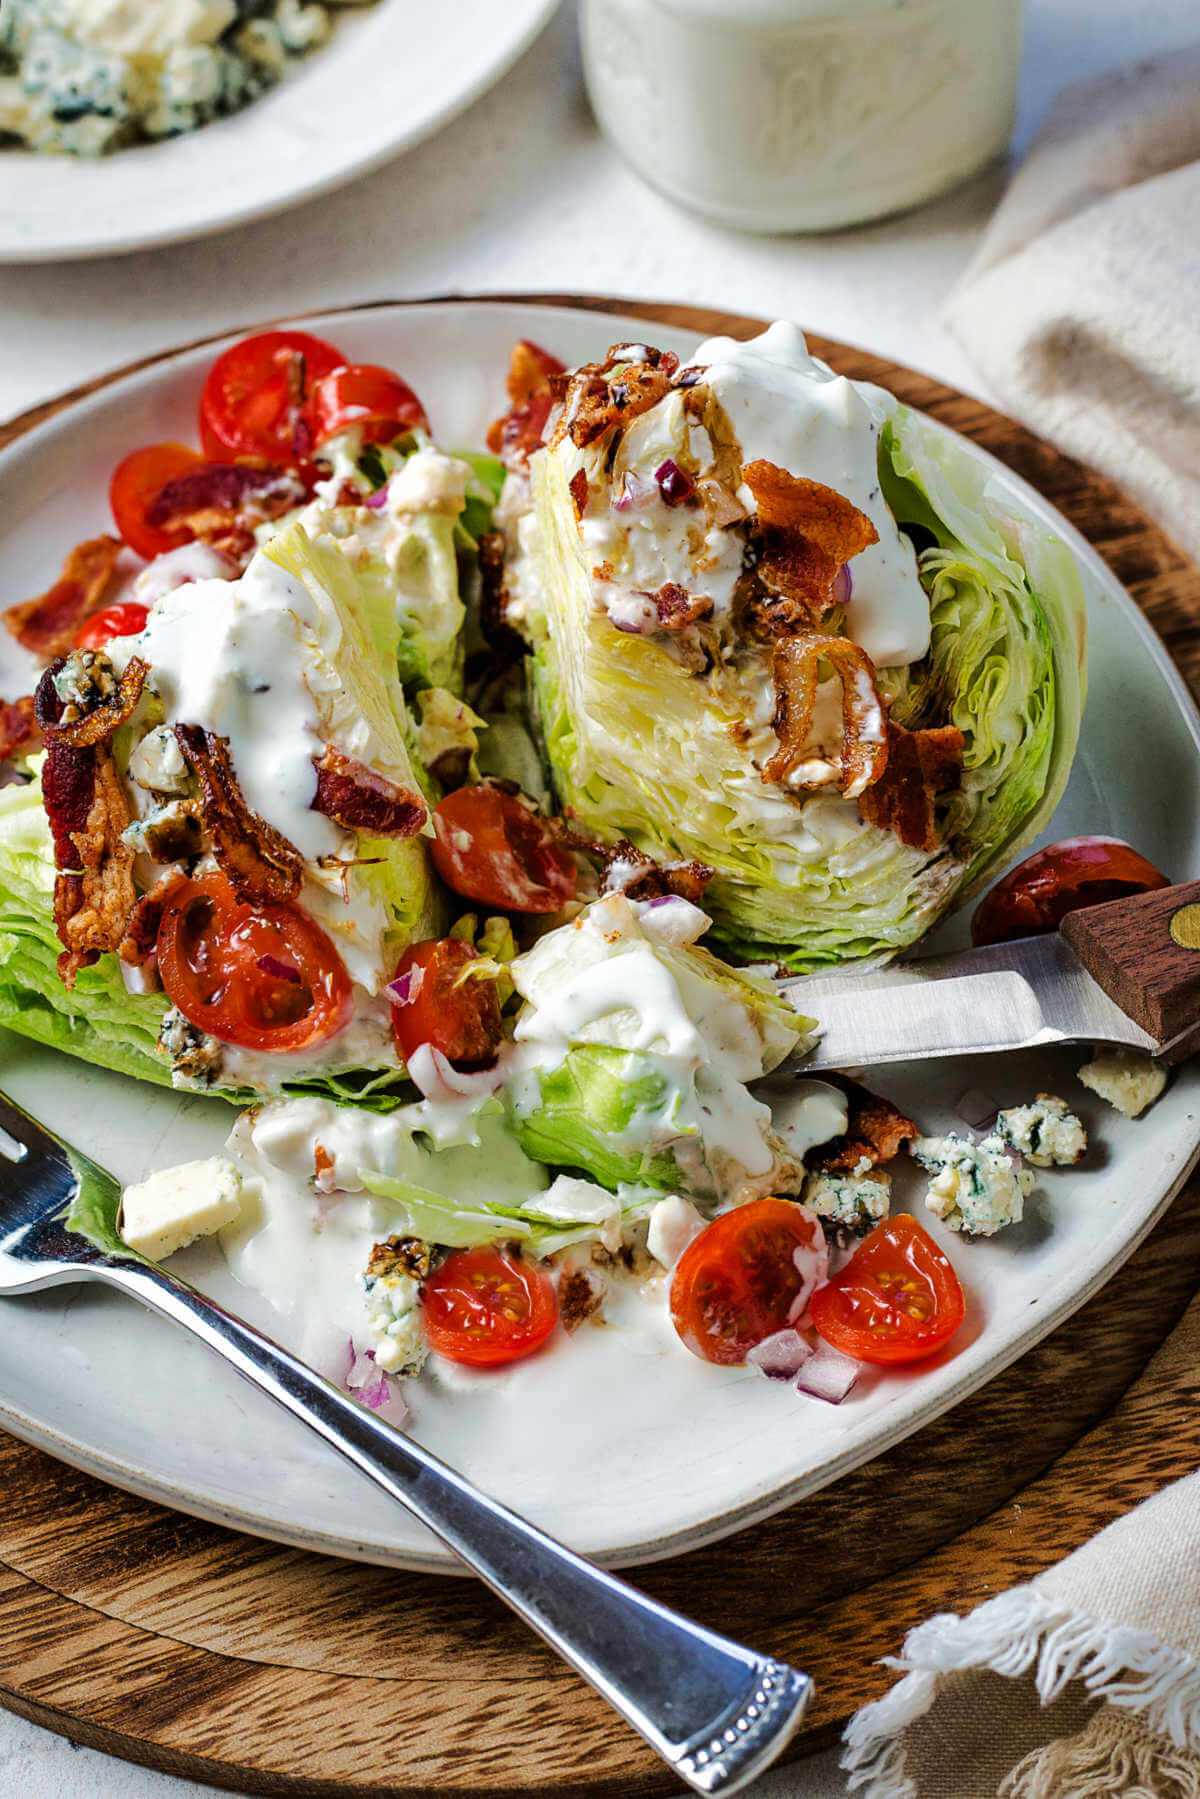 A serving of wedge salad cut into pieces on a plate with a fork and steak knife.